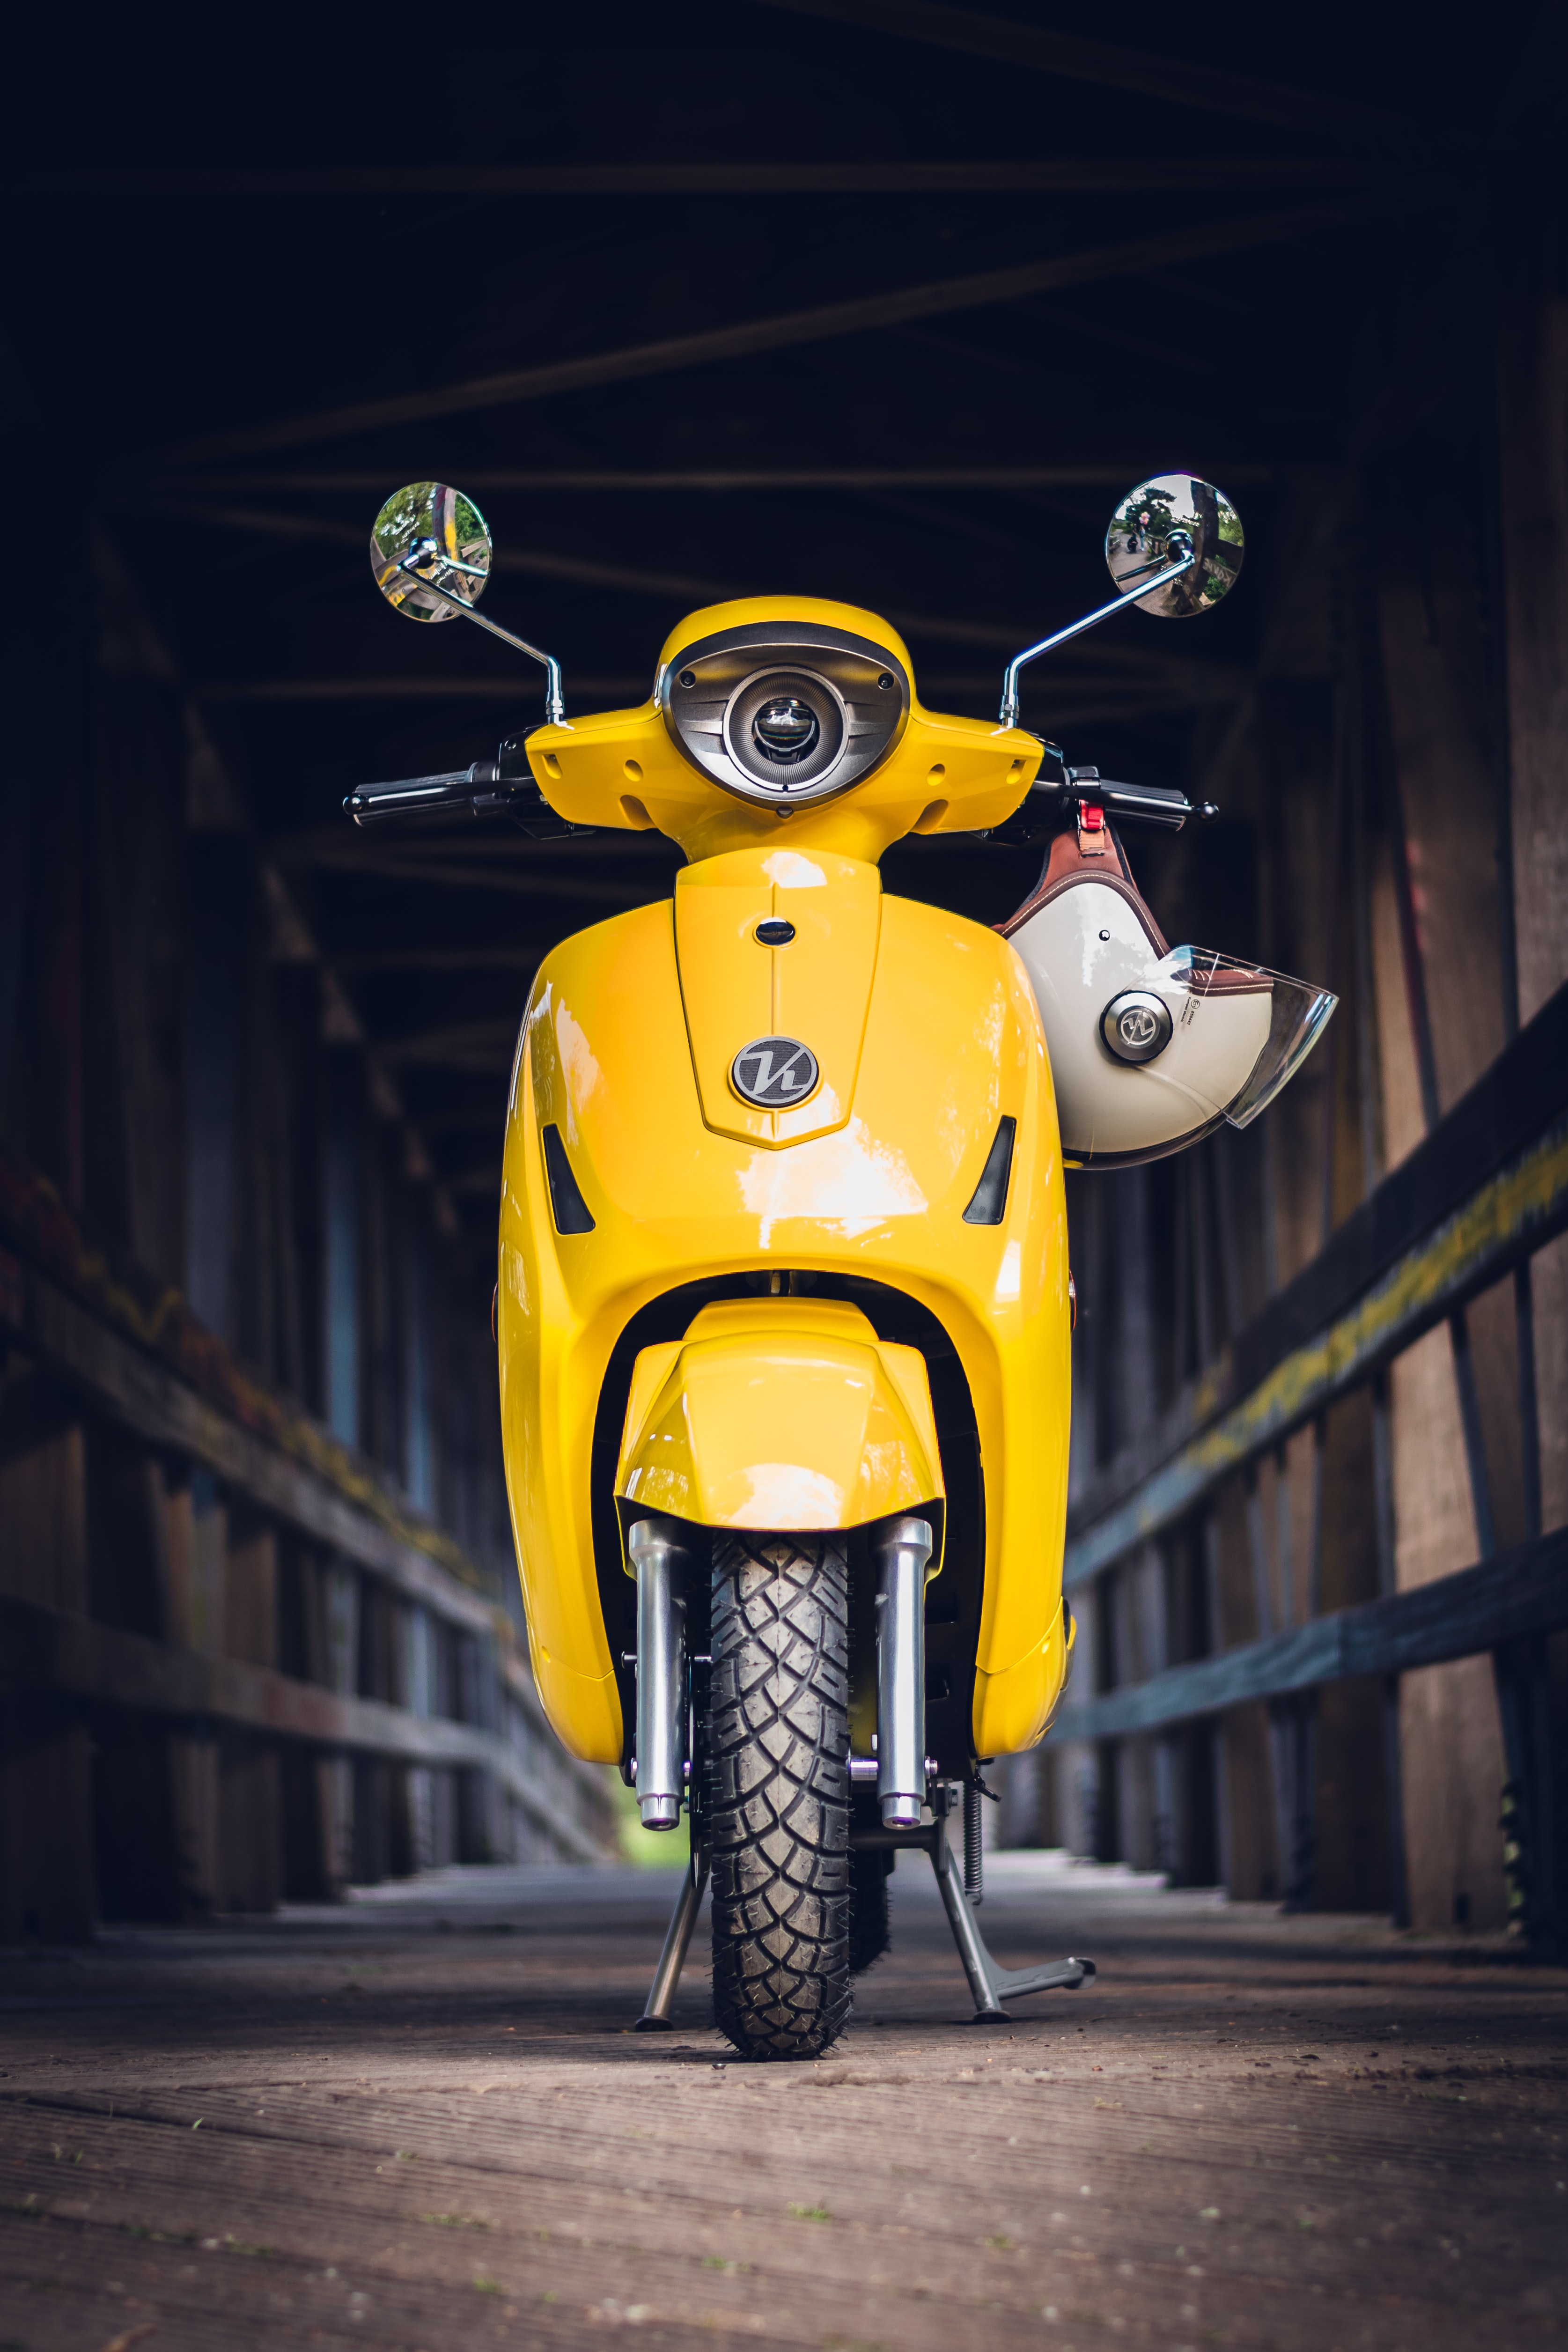 moped, yellow, motorcycles, front view, helmet, scooter